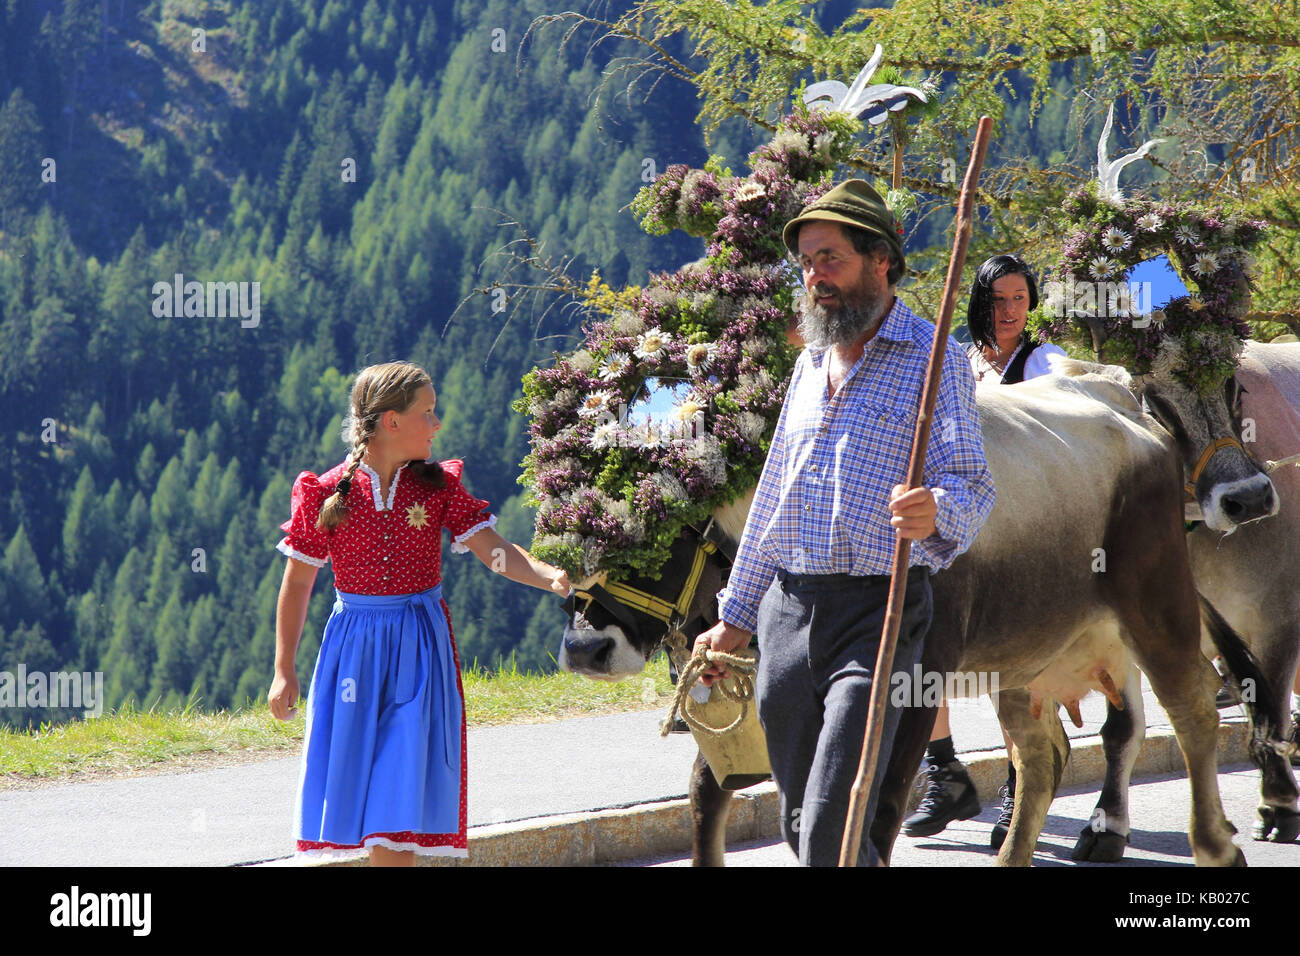 Almabtrieb (ceremonial driving down of animals from the mountain pastures into the valley in autumn), Viehscheid in Jerzens, Pitztal, Tyrol, Austria, Stock Photo